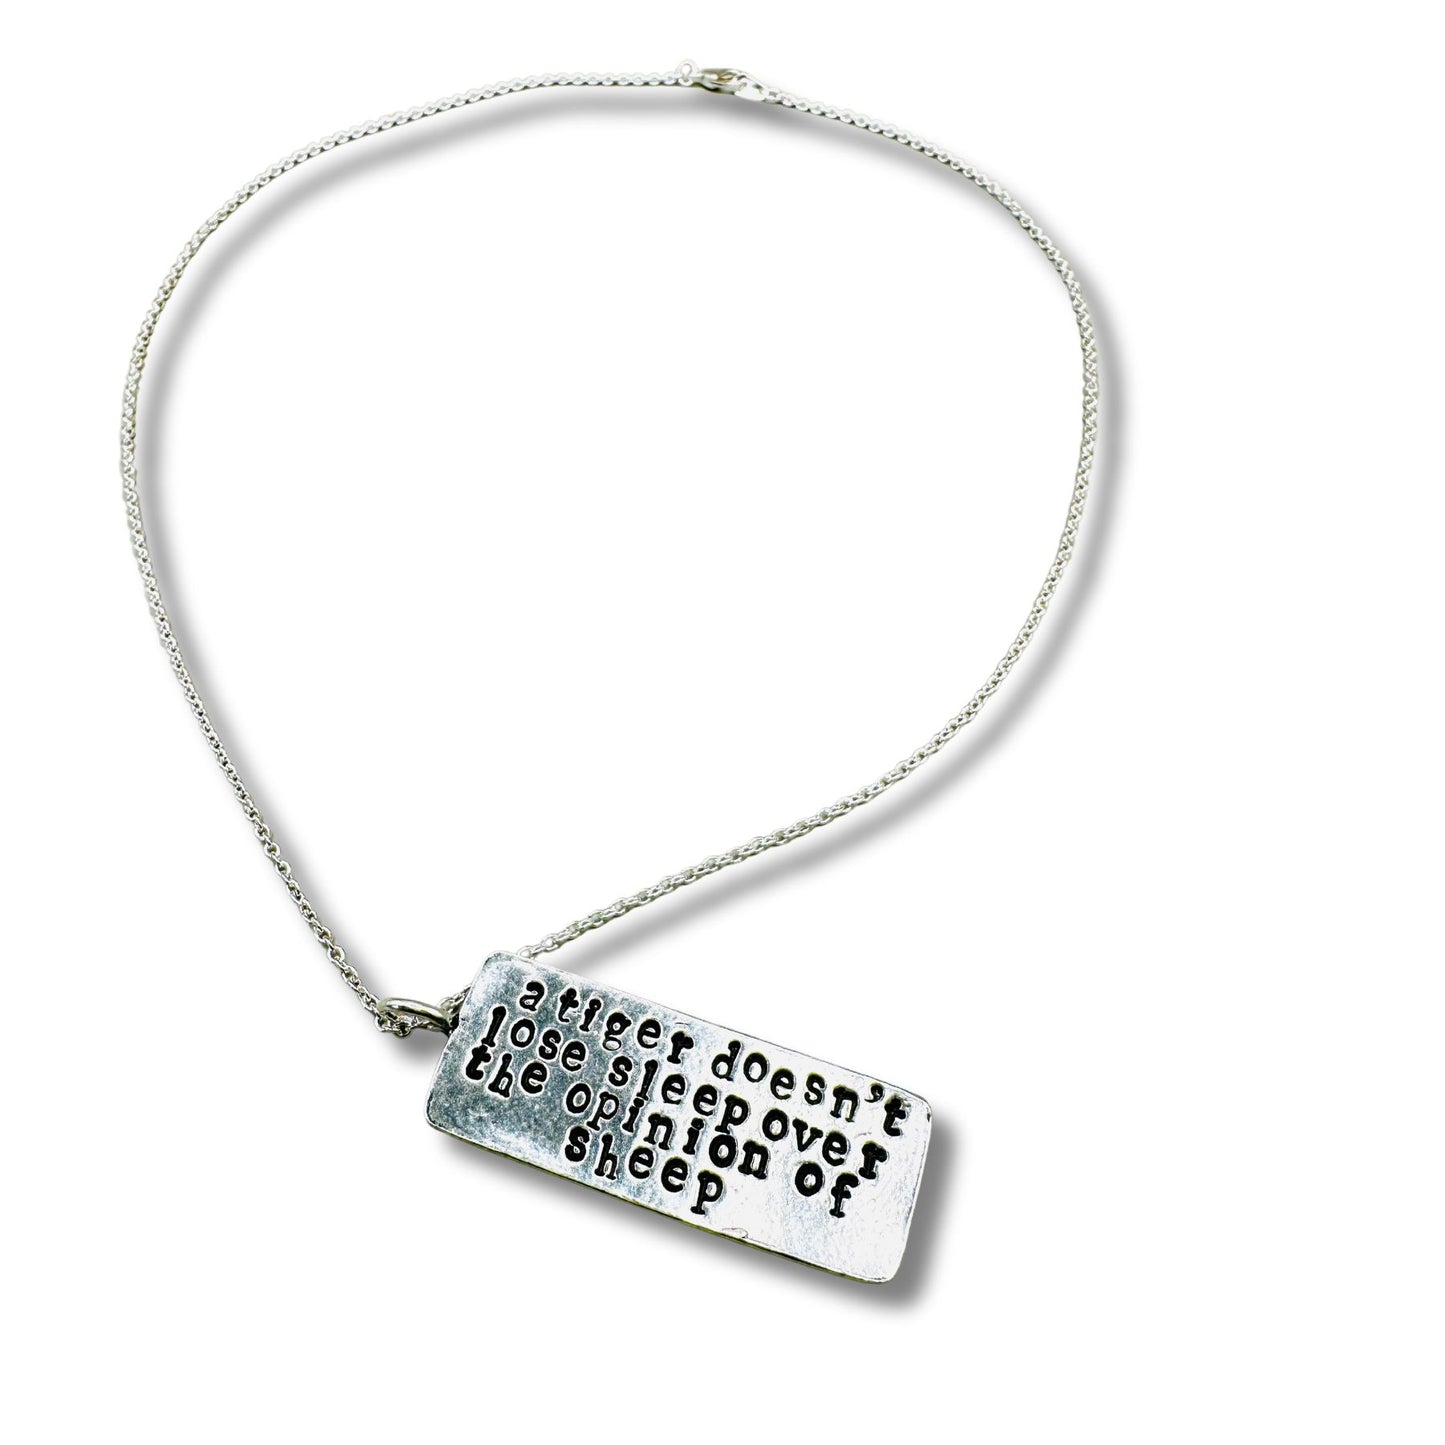 A Tiger Doesn't Lose Sleep Hand Stamped Necklace